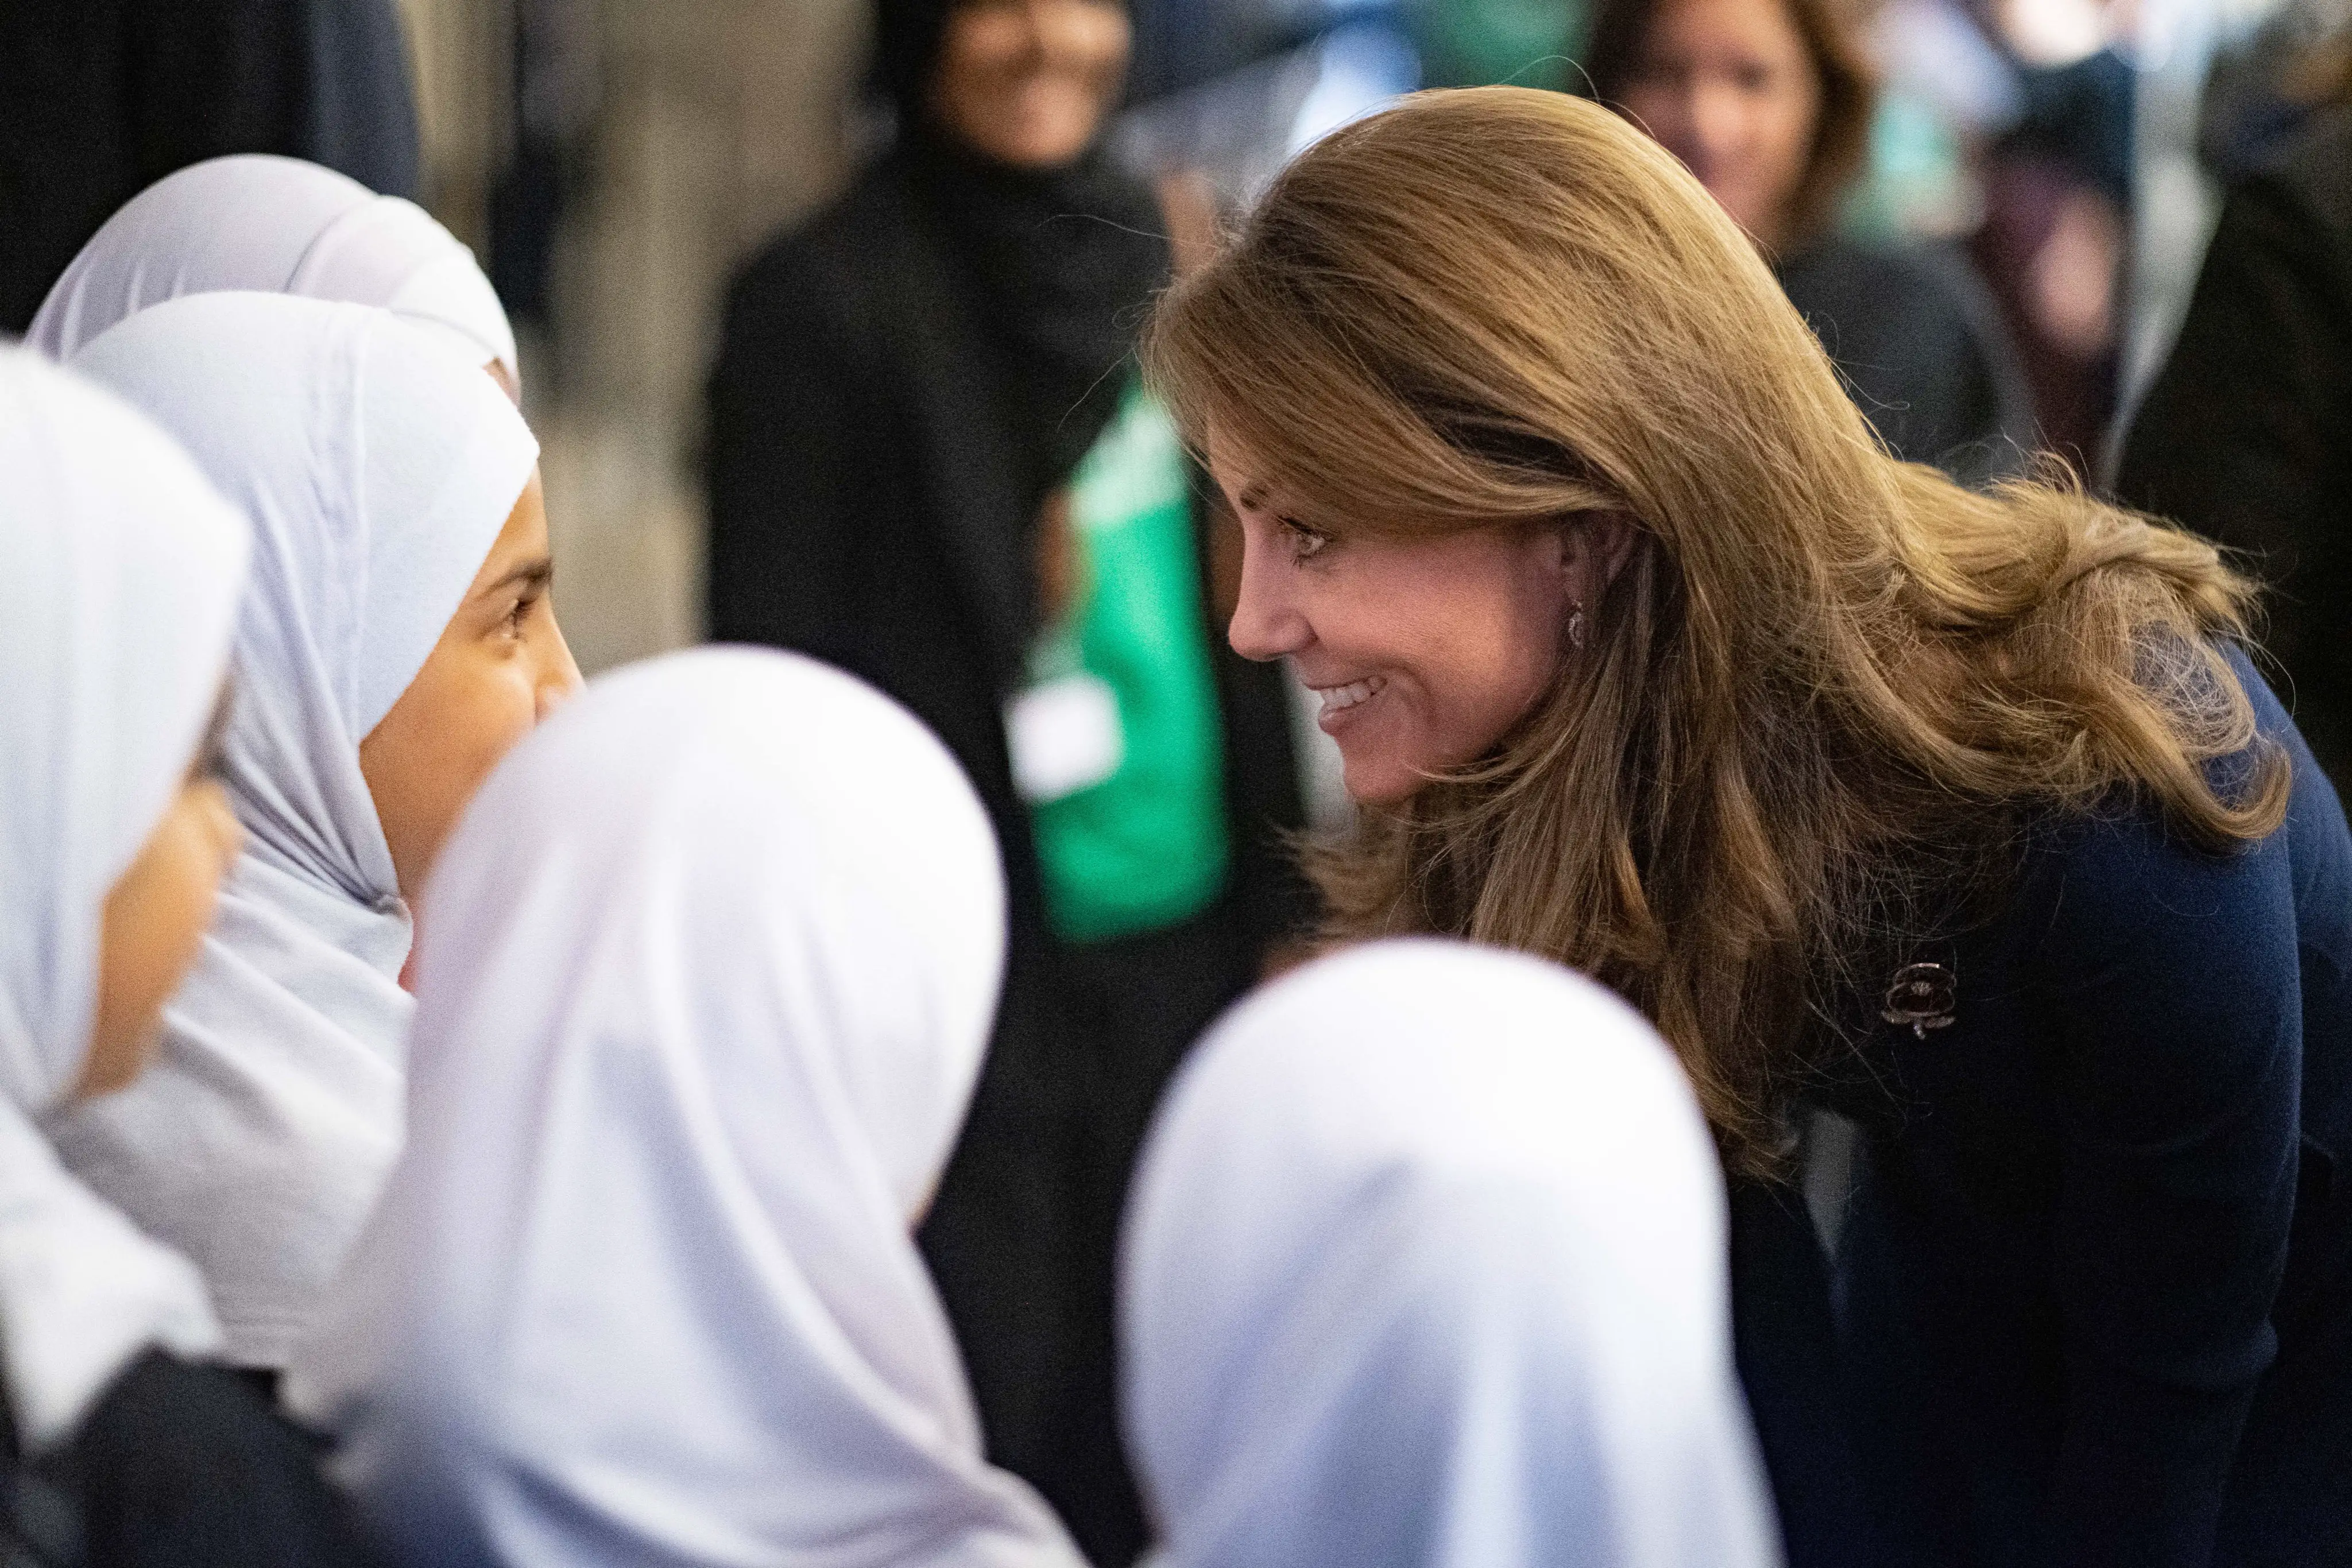 Duchess of Cambridge met the Grenfall Tower Fire victims during the launch of National Emergencies trust